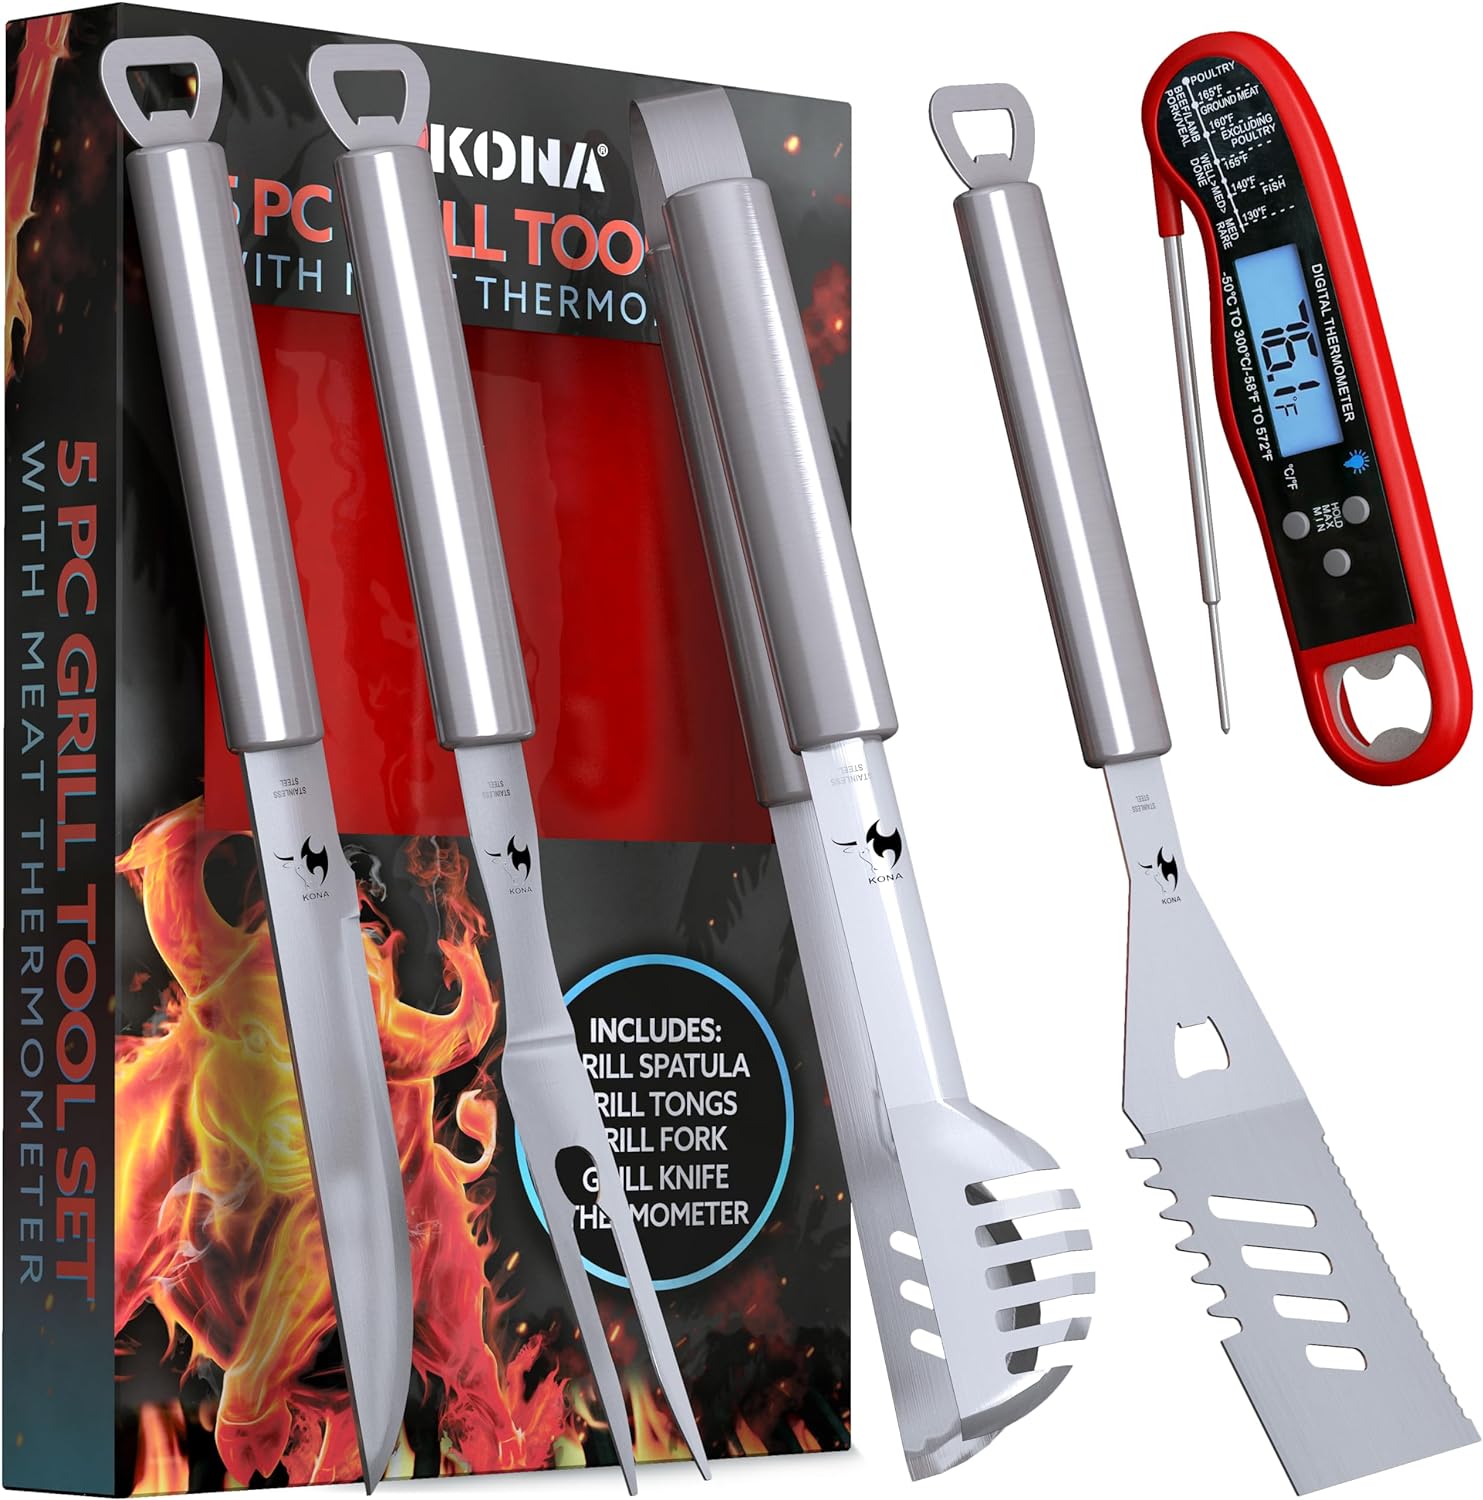 Kona Ultimate BBQ Grill Accessories Kit - All-in-One Outdoor Grilling Tools Set - Premium 18 Grill Tools & BBQ Utensils - Perfect Grill Set for BBQ Enthusiasts Includes Instant Read Meat Thermometer